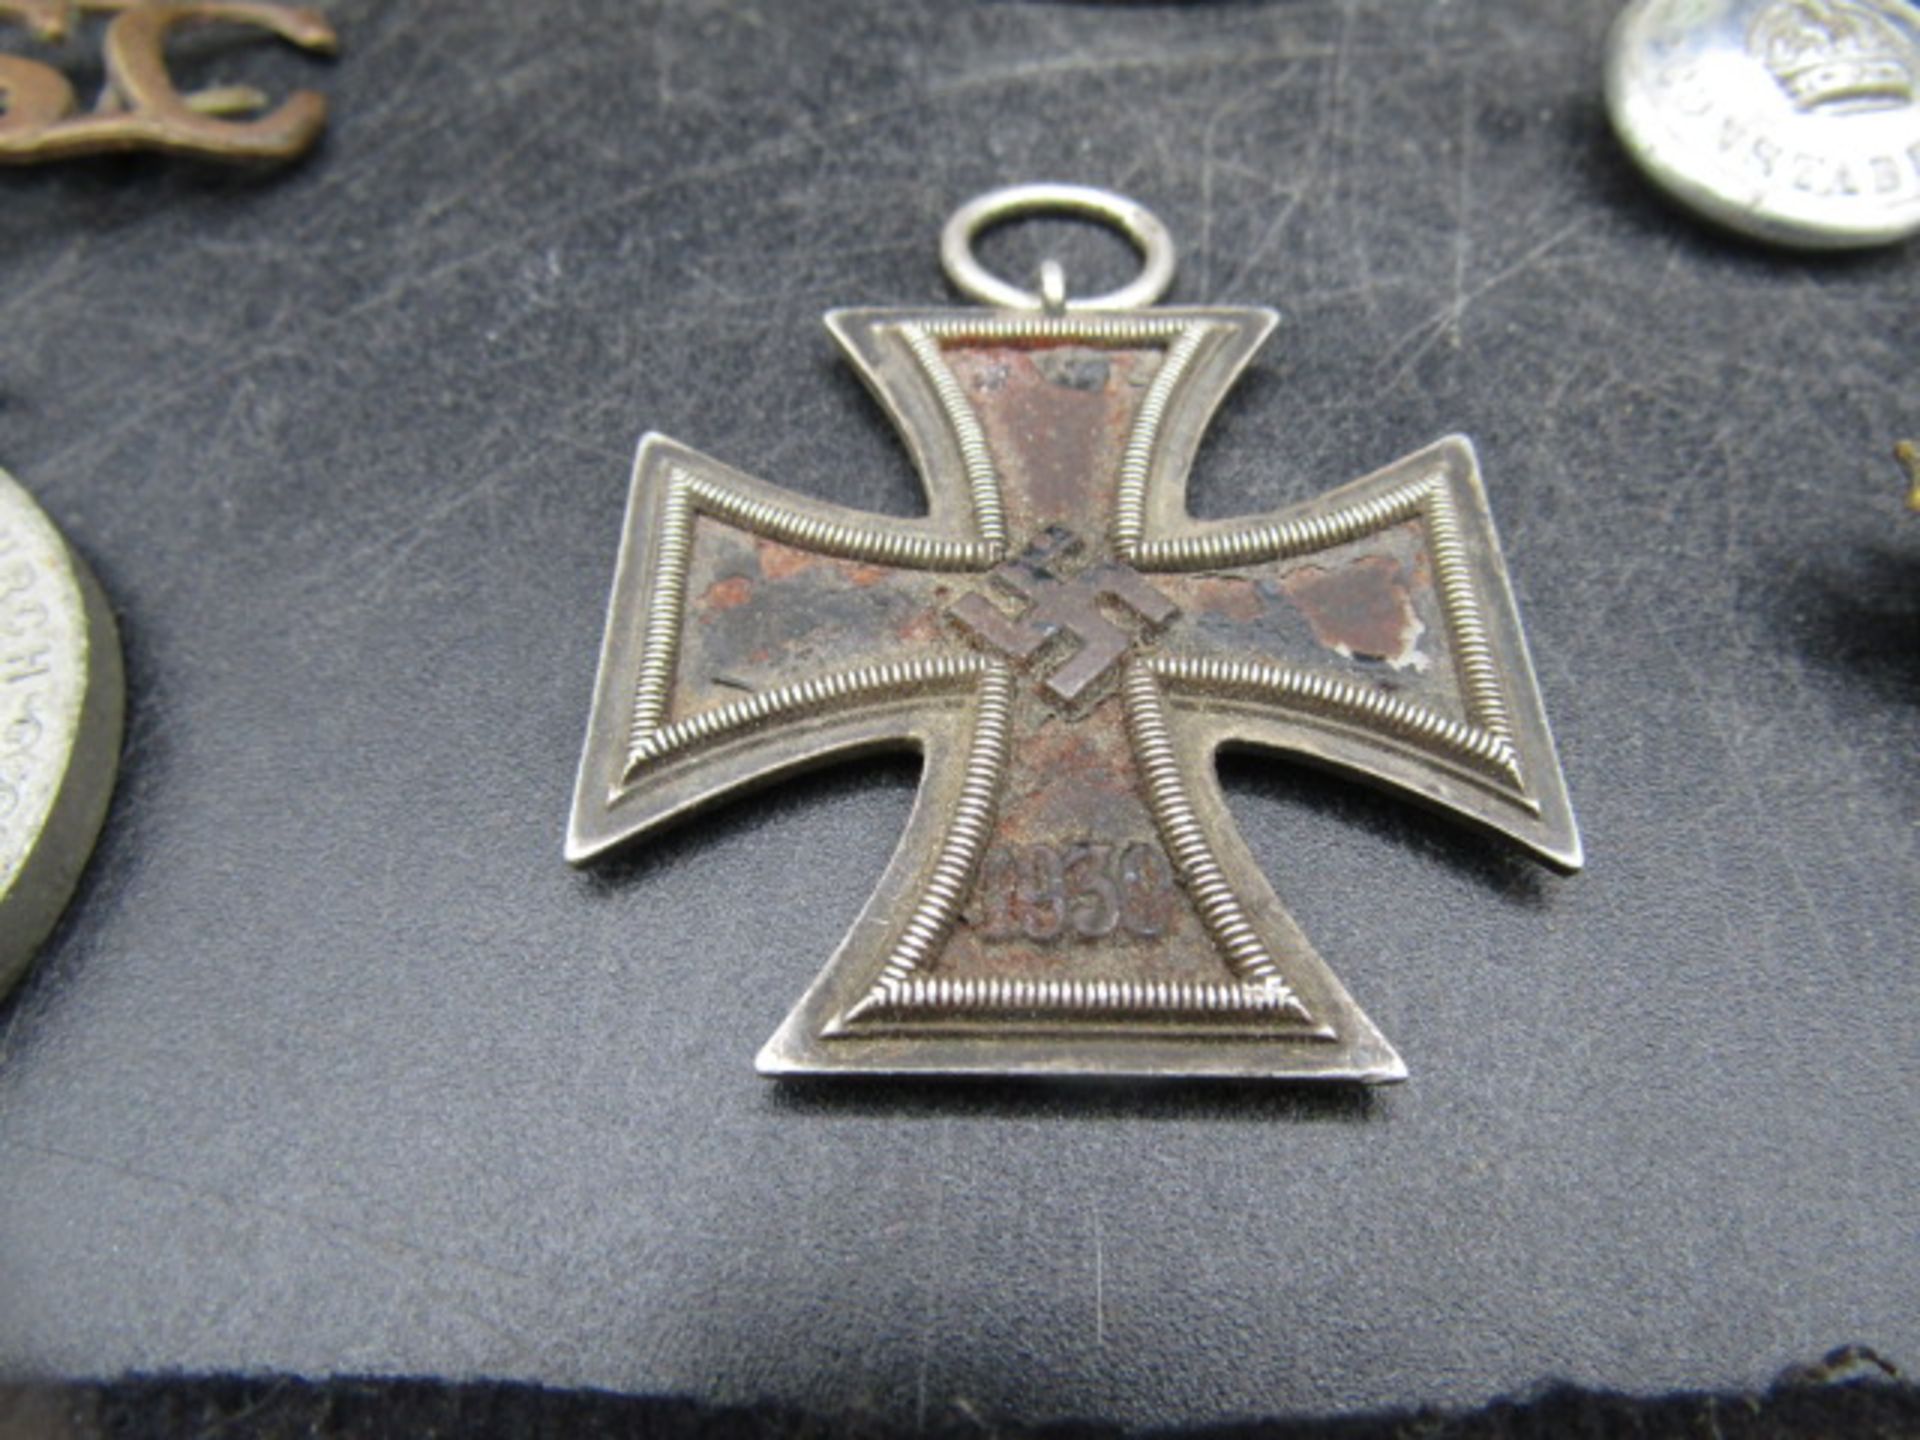 WW2 iron cross and various insignia badges and patches plus a charm bracelet - Image 8 of 9